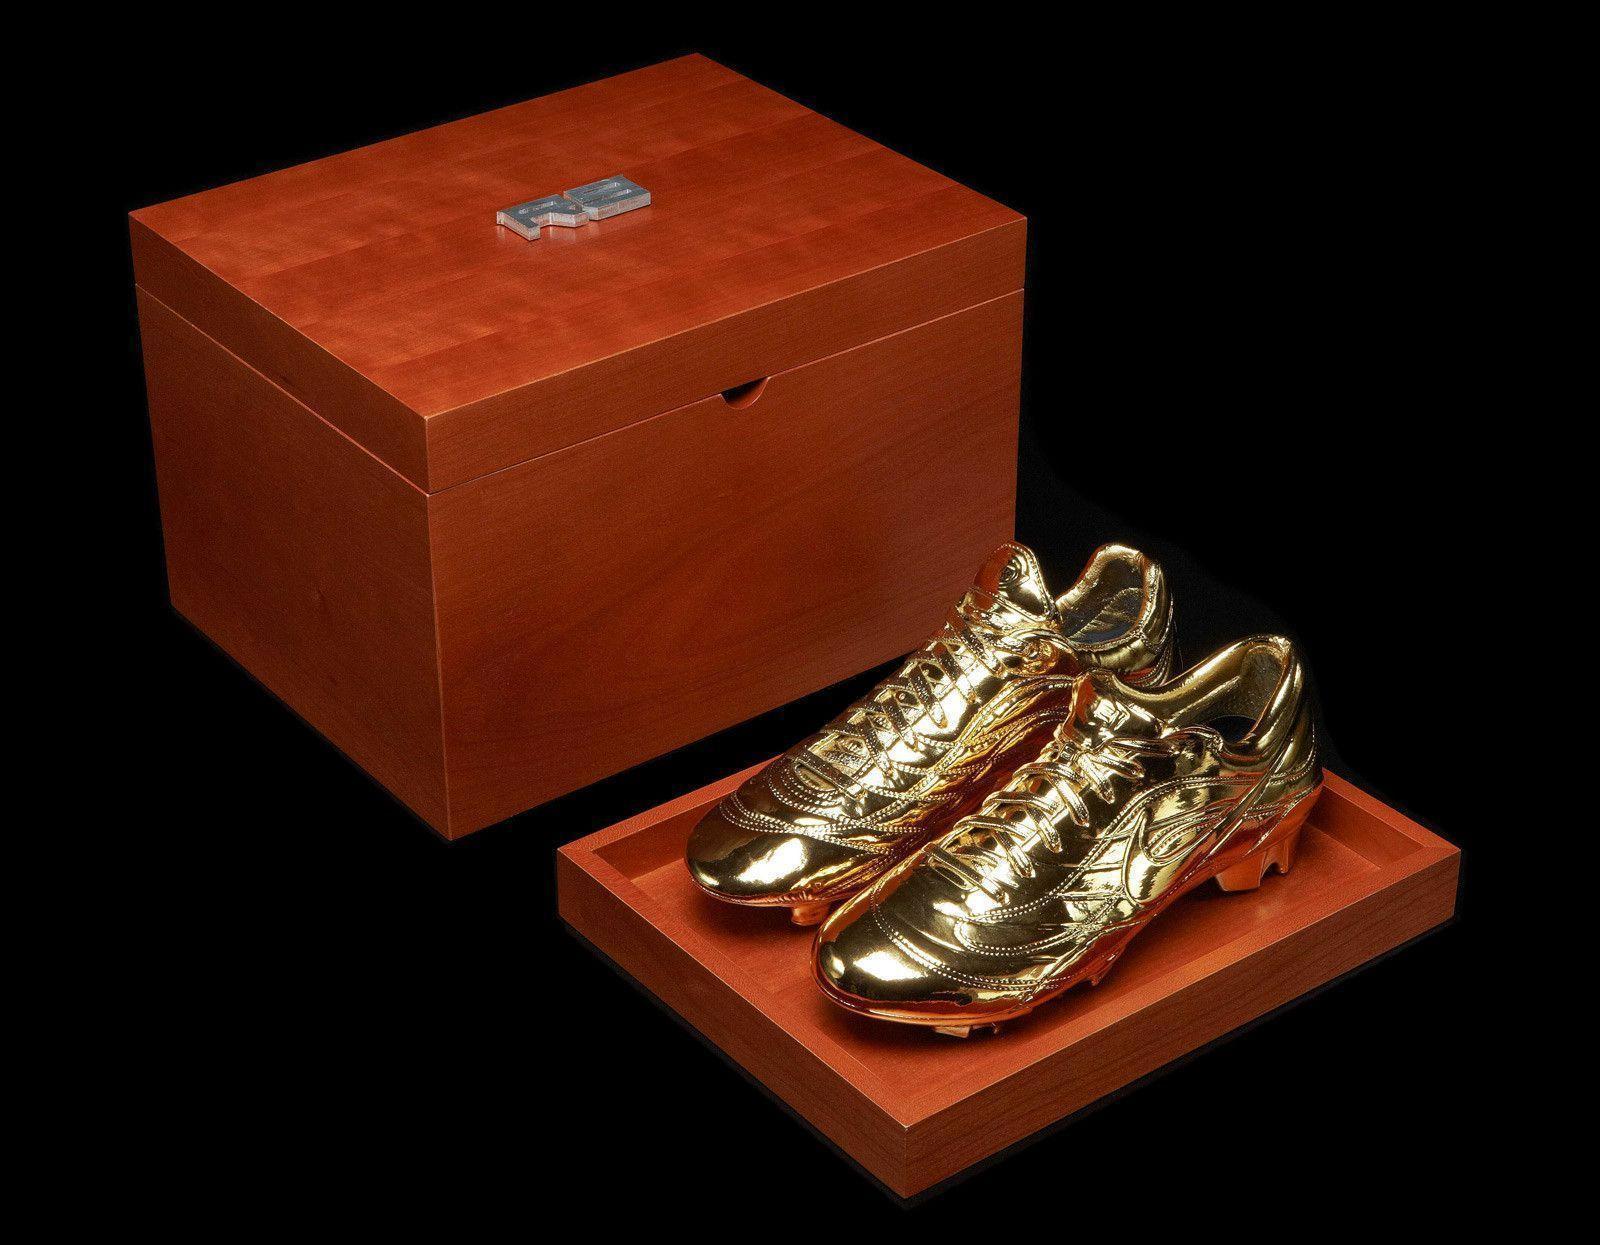 Nike&;s Gold Mercurial Soccer Boots In Honor To Ronaldo